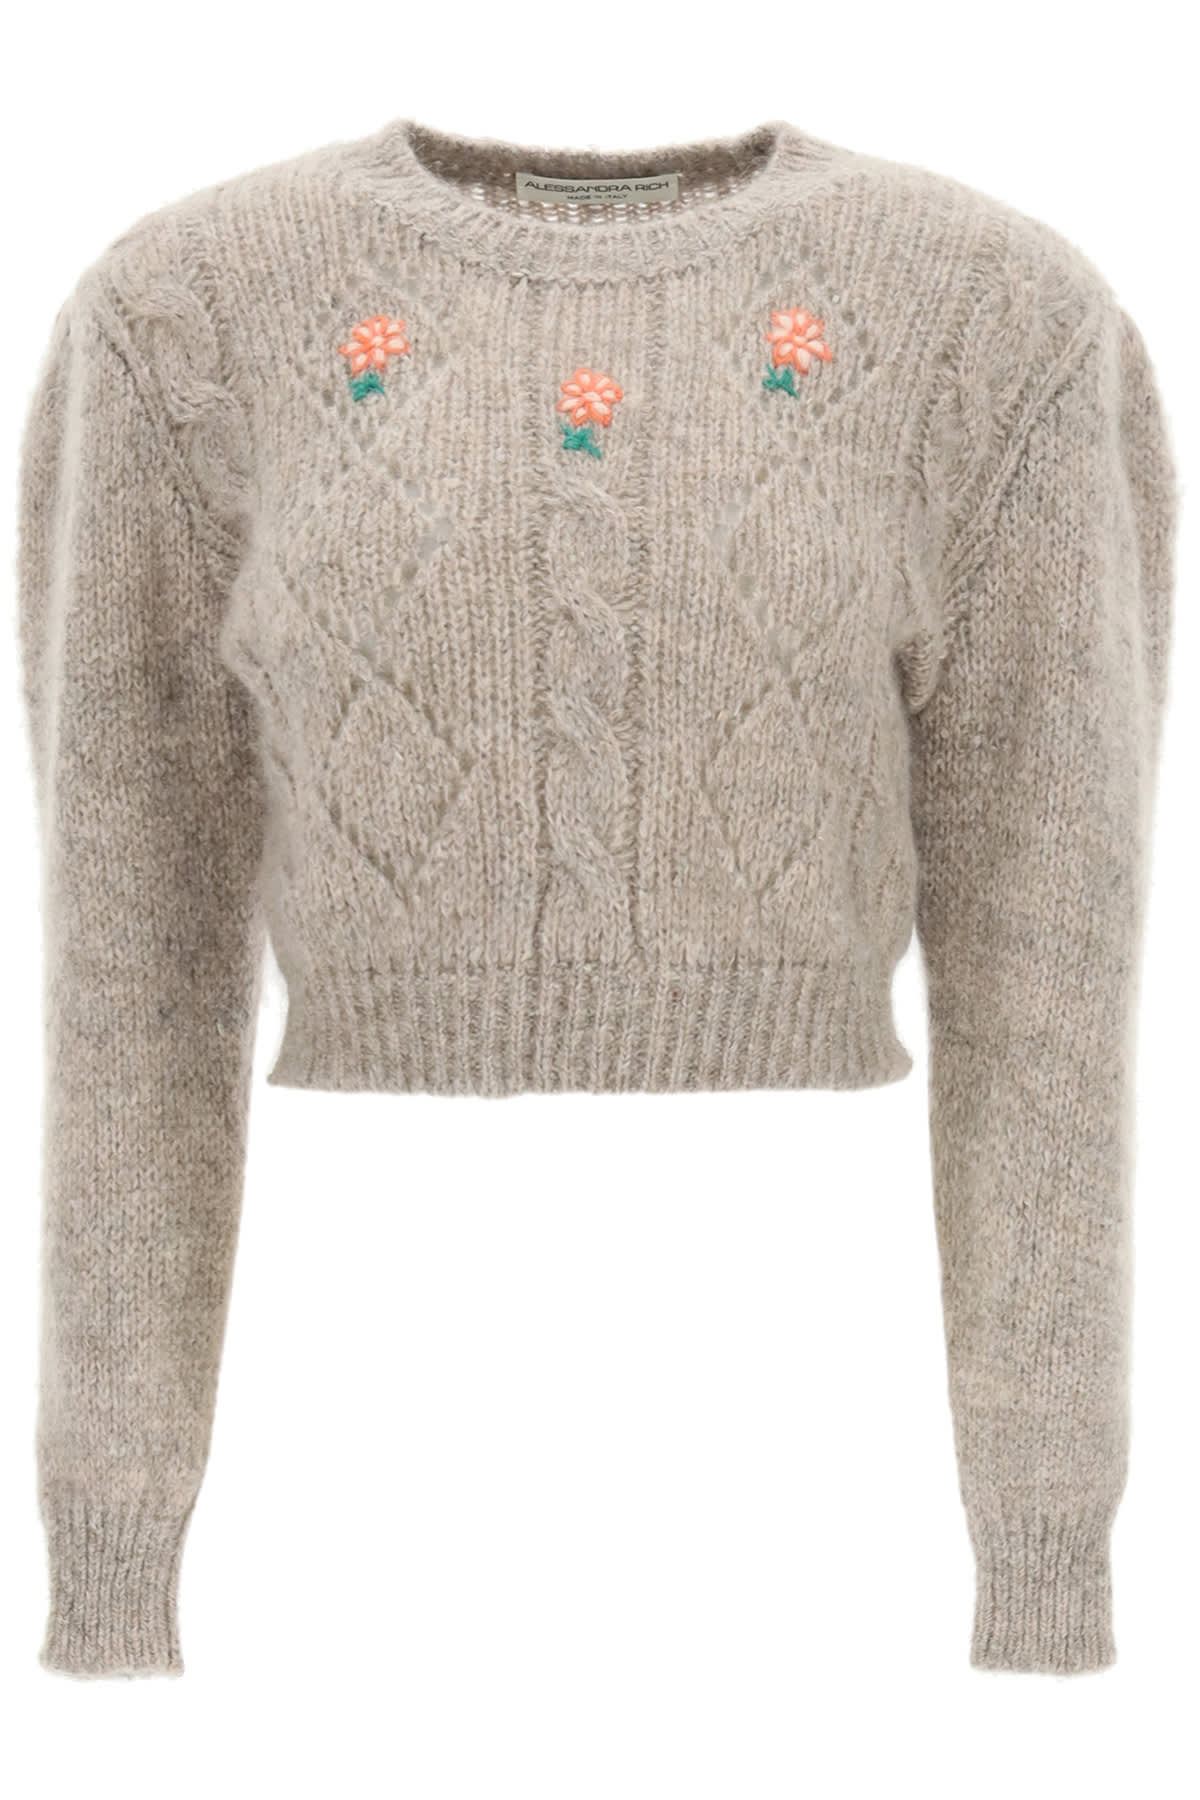 ALESSANDRA RICH SHORT SWEATER WITH EMBROIDERIES,FAB2517 K3212 18360